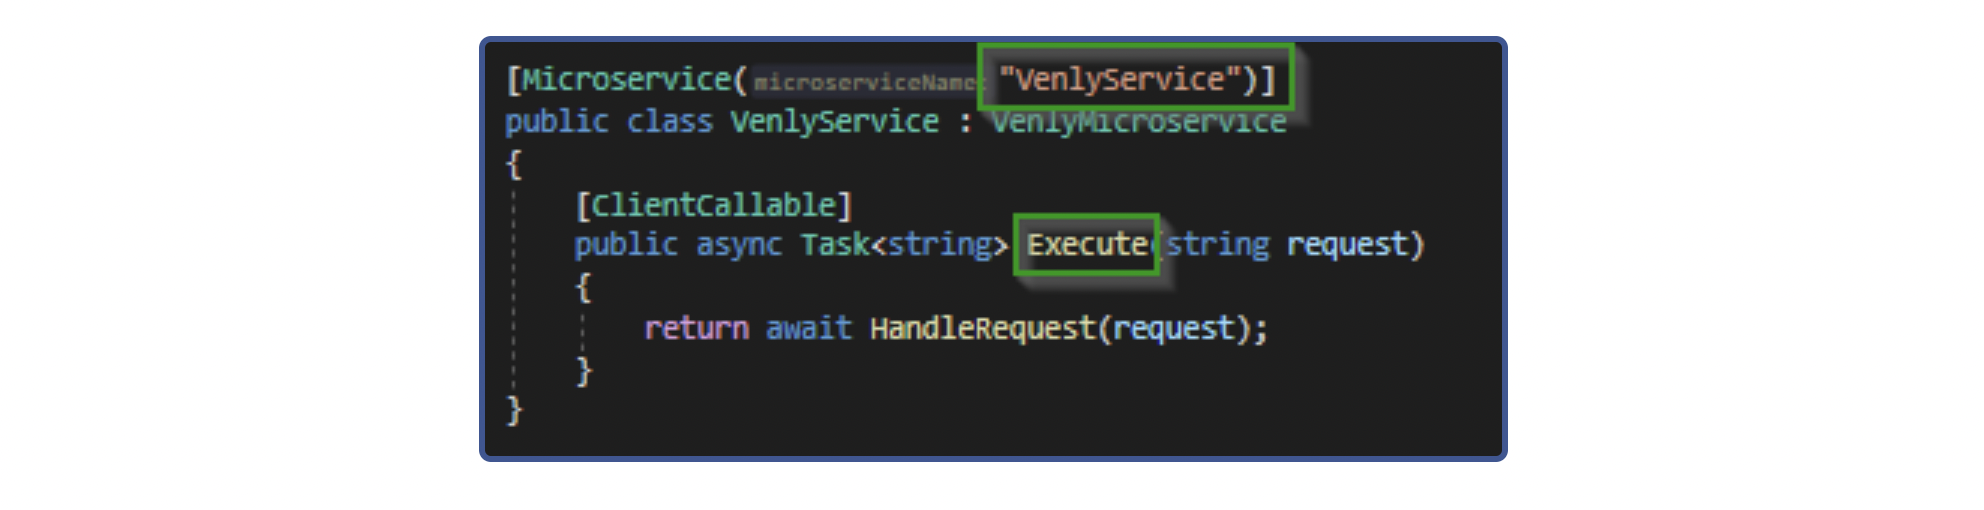 Microservice name and Entry function name